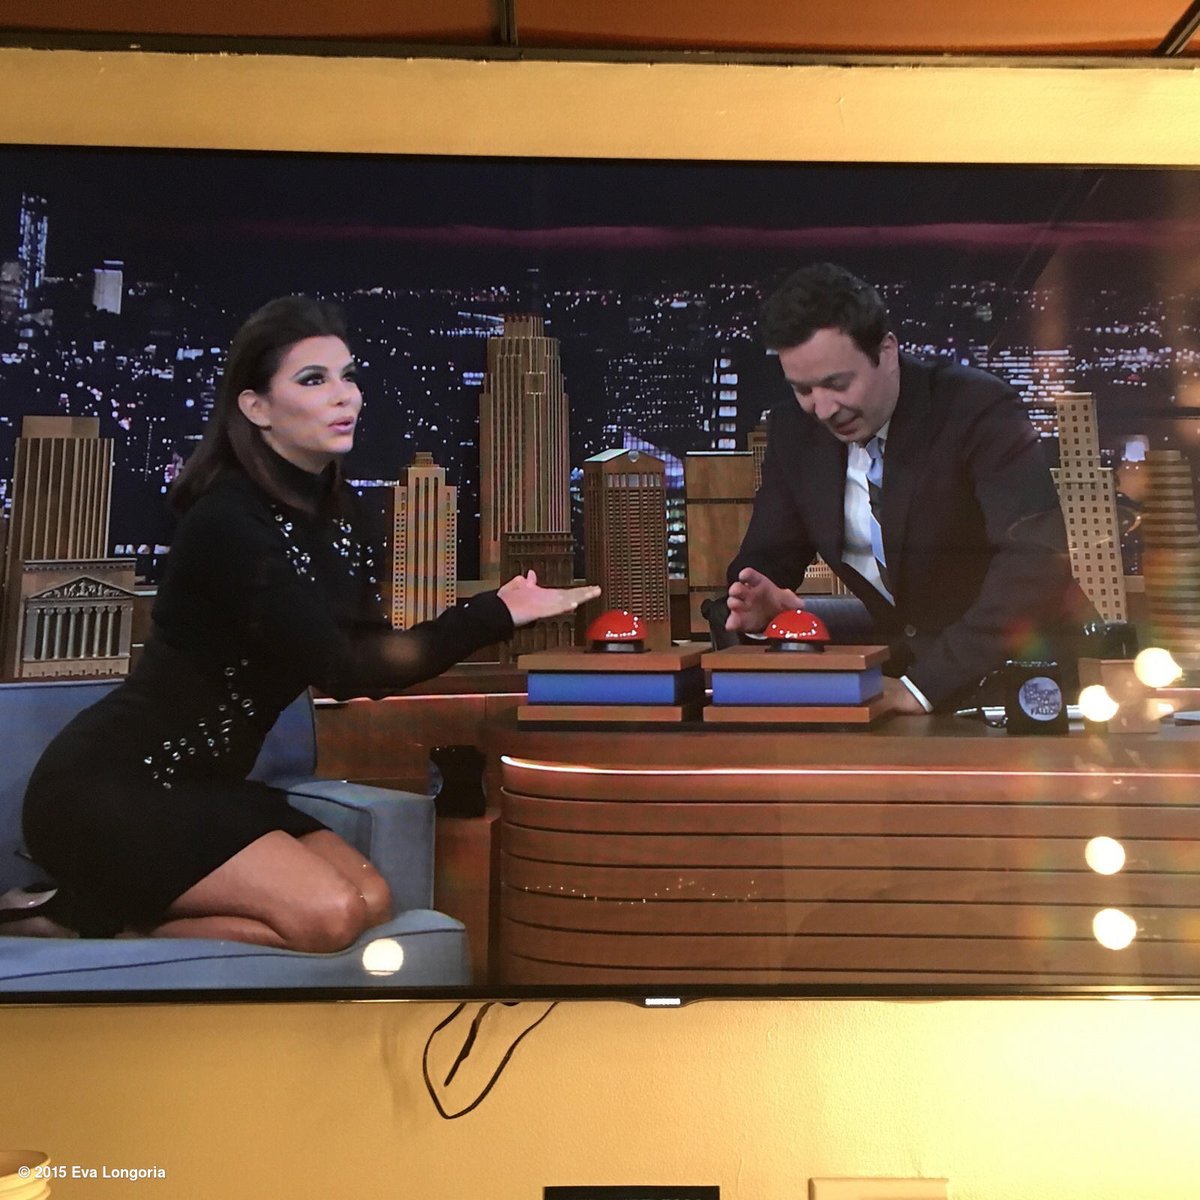 Tune in to The Tonight Show tonight to see who wins our game of Fast Family Feud! @jimmyfallon https://t.co/ZMYyRcAA3w